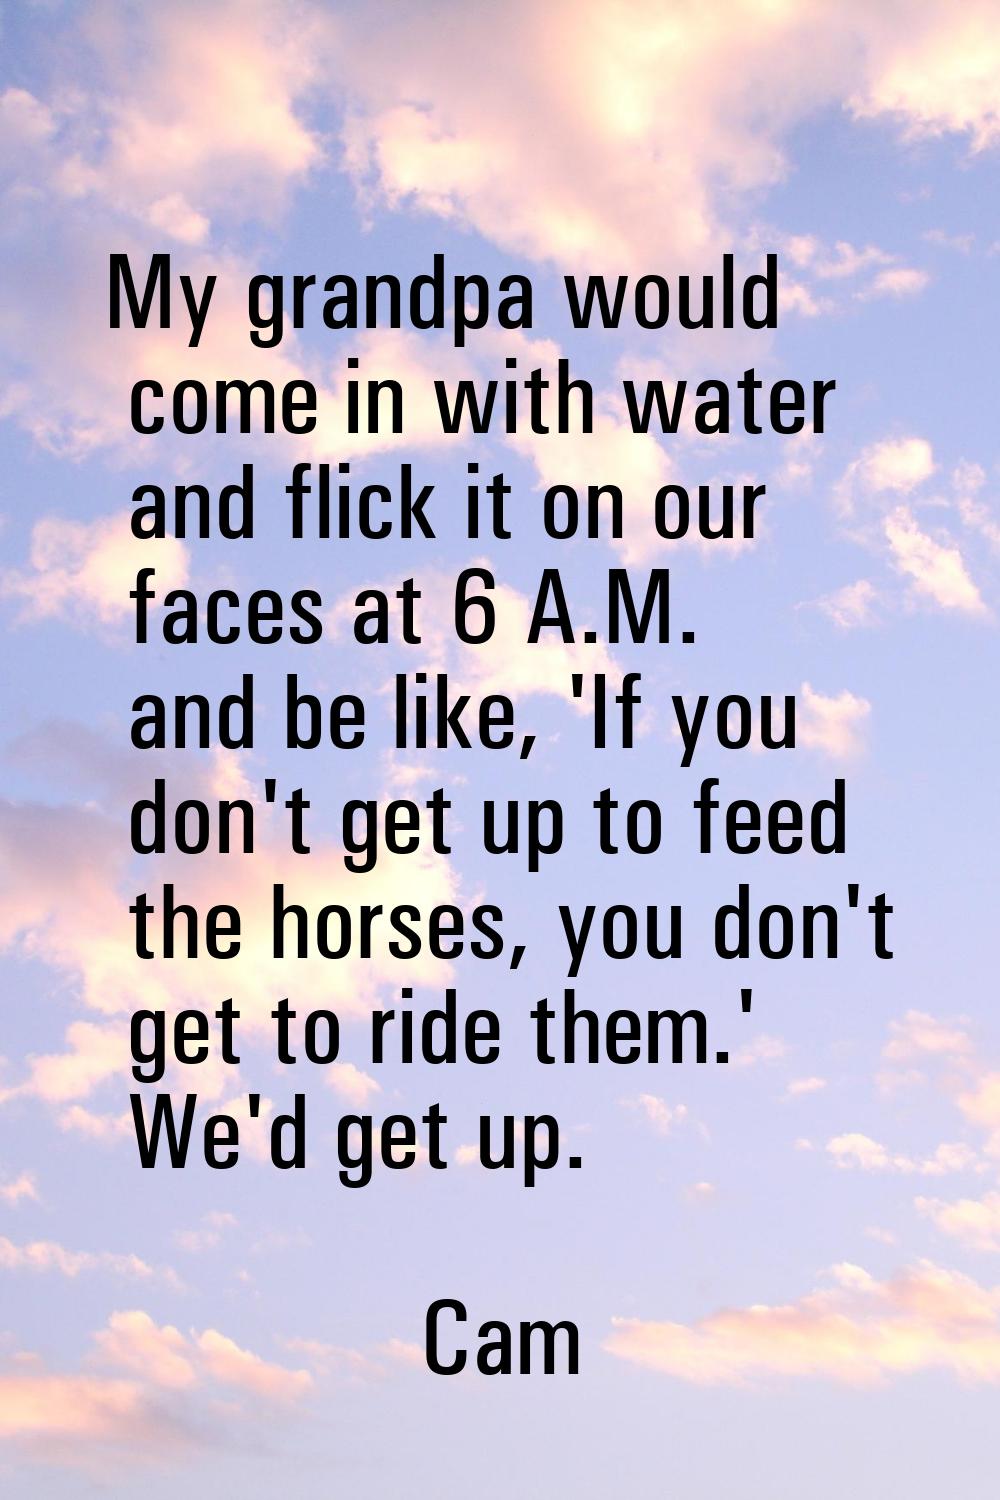 My grandpa would come in with water and flick it on our faces at 6 A.M. and be like, 'If you don't 